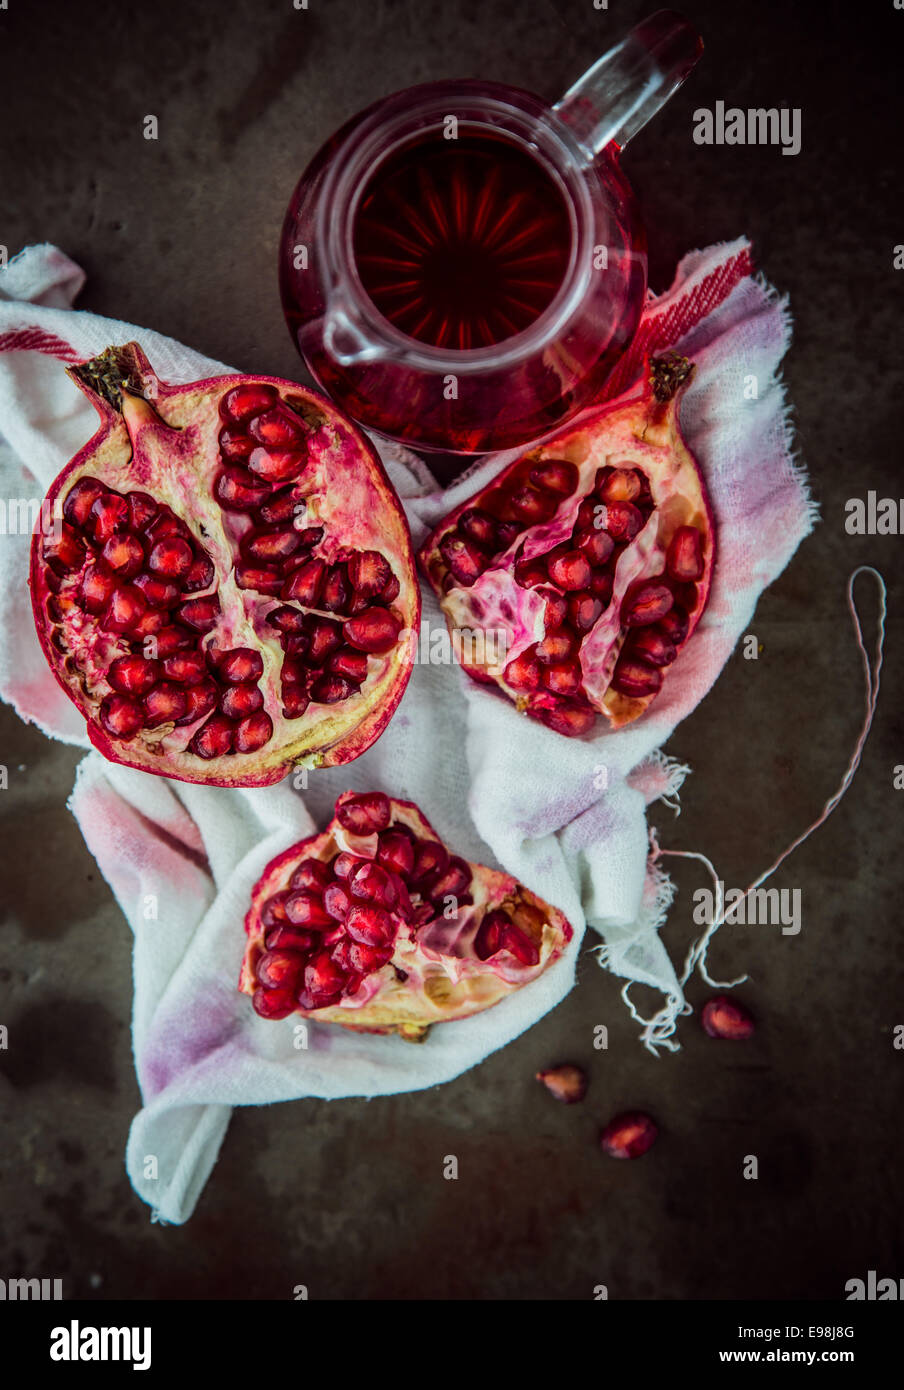 Making fresh pomegranate juice with an overhead view of a broken open fruit displaying the ripe red seeds on a stained muslin cloth with a jug of freshly prepared juice alongside Stock Photo